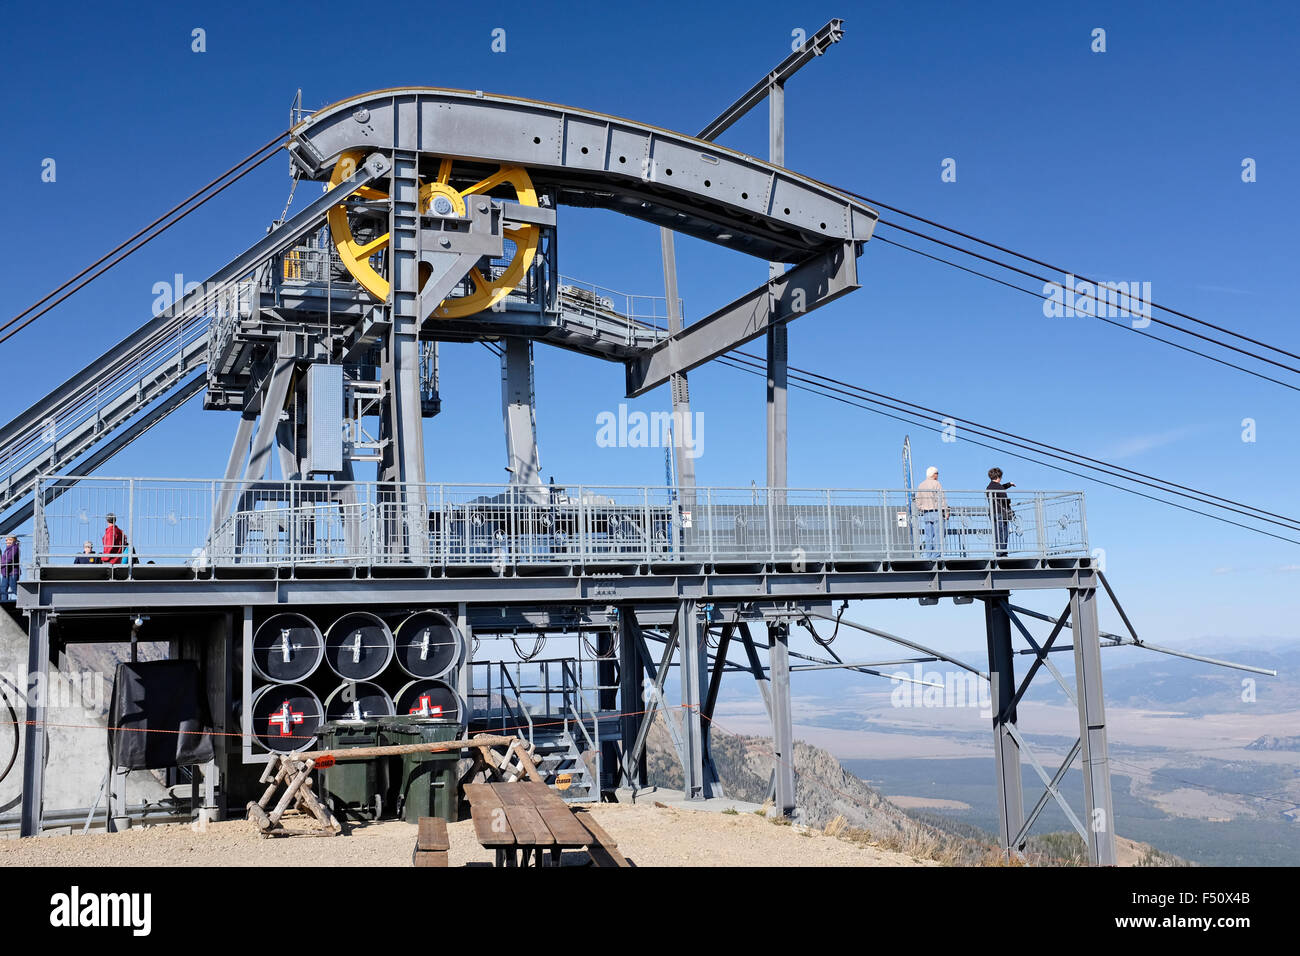 Aerial tram at the Top of Mount Rendezvous, Grand Tetons National Park, Jackson Hole, Wyoming Stock Photo